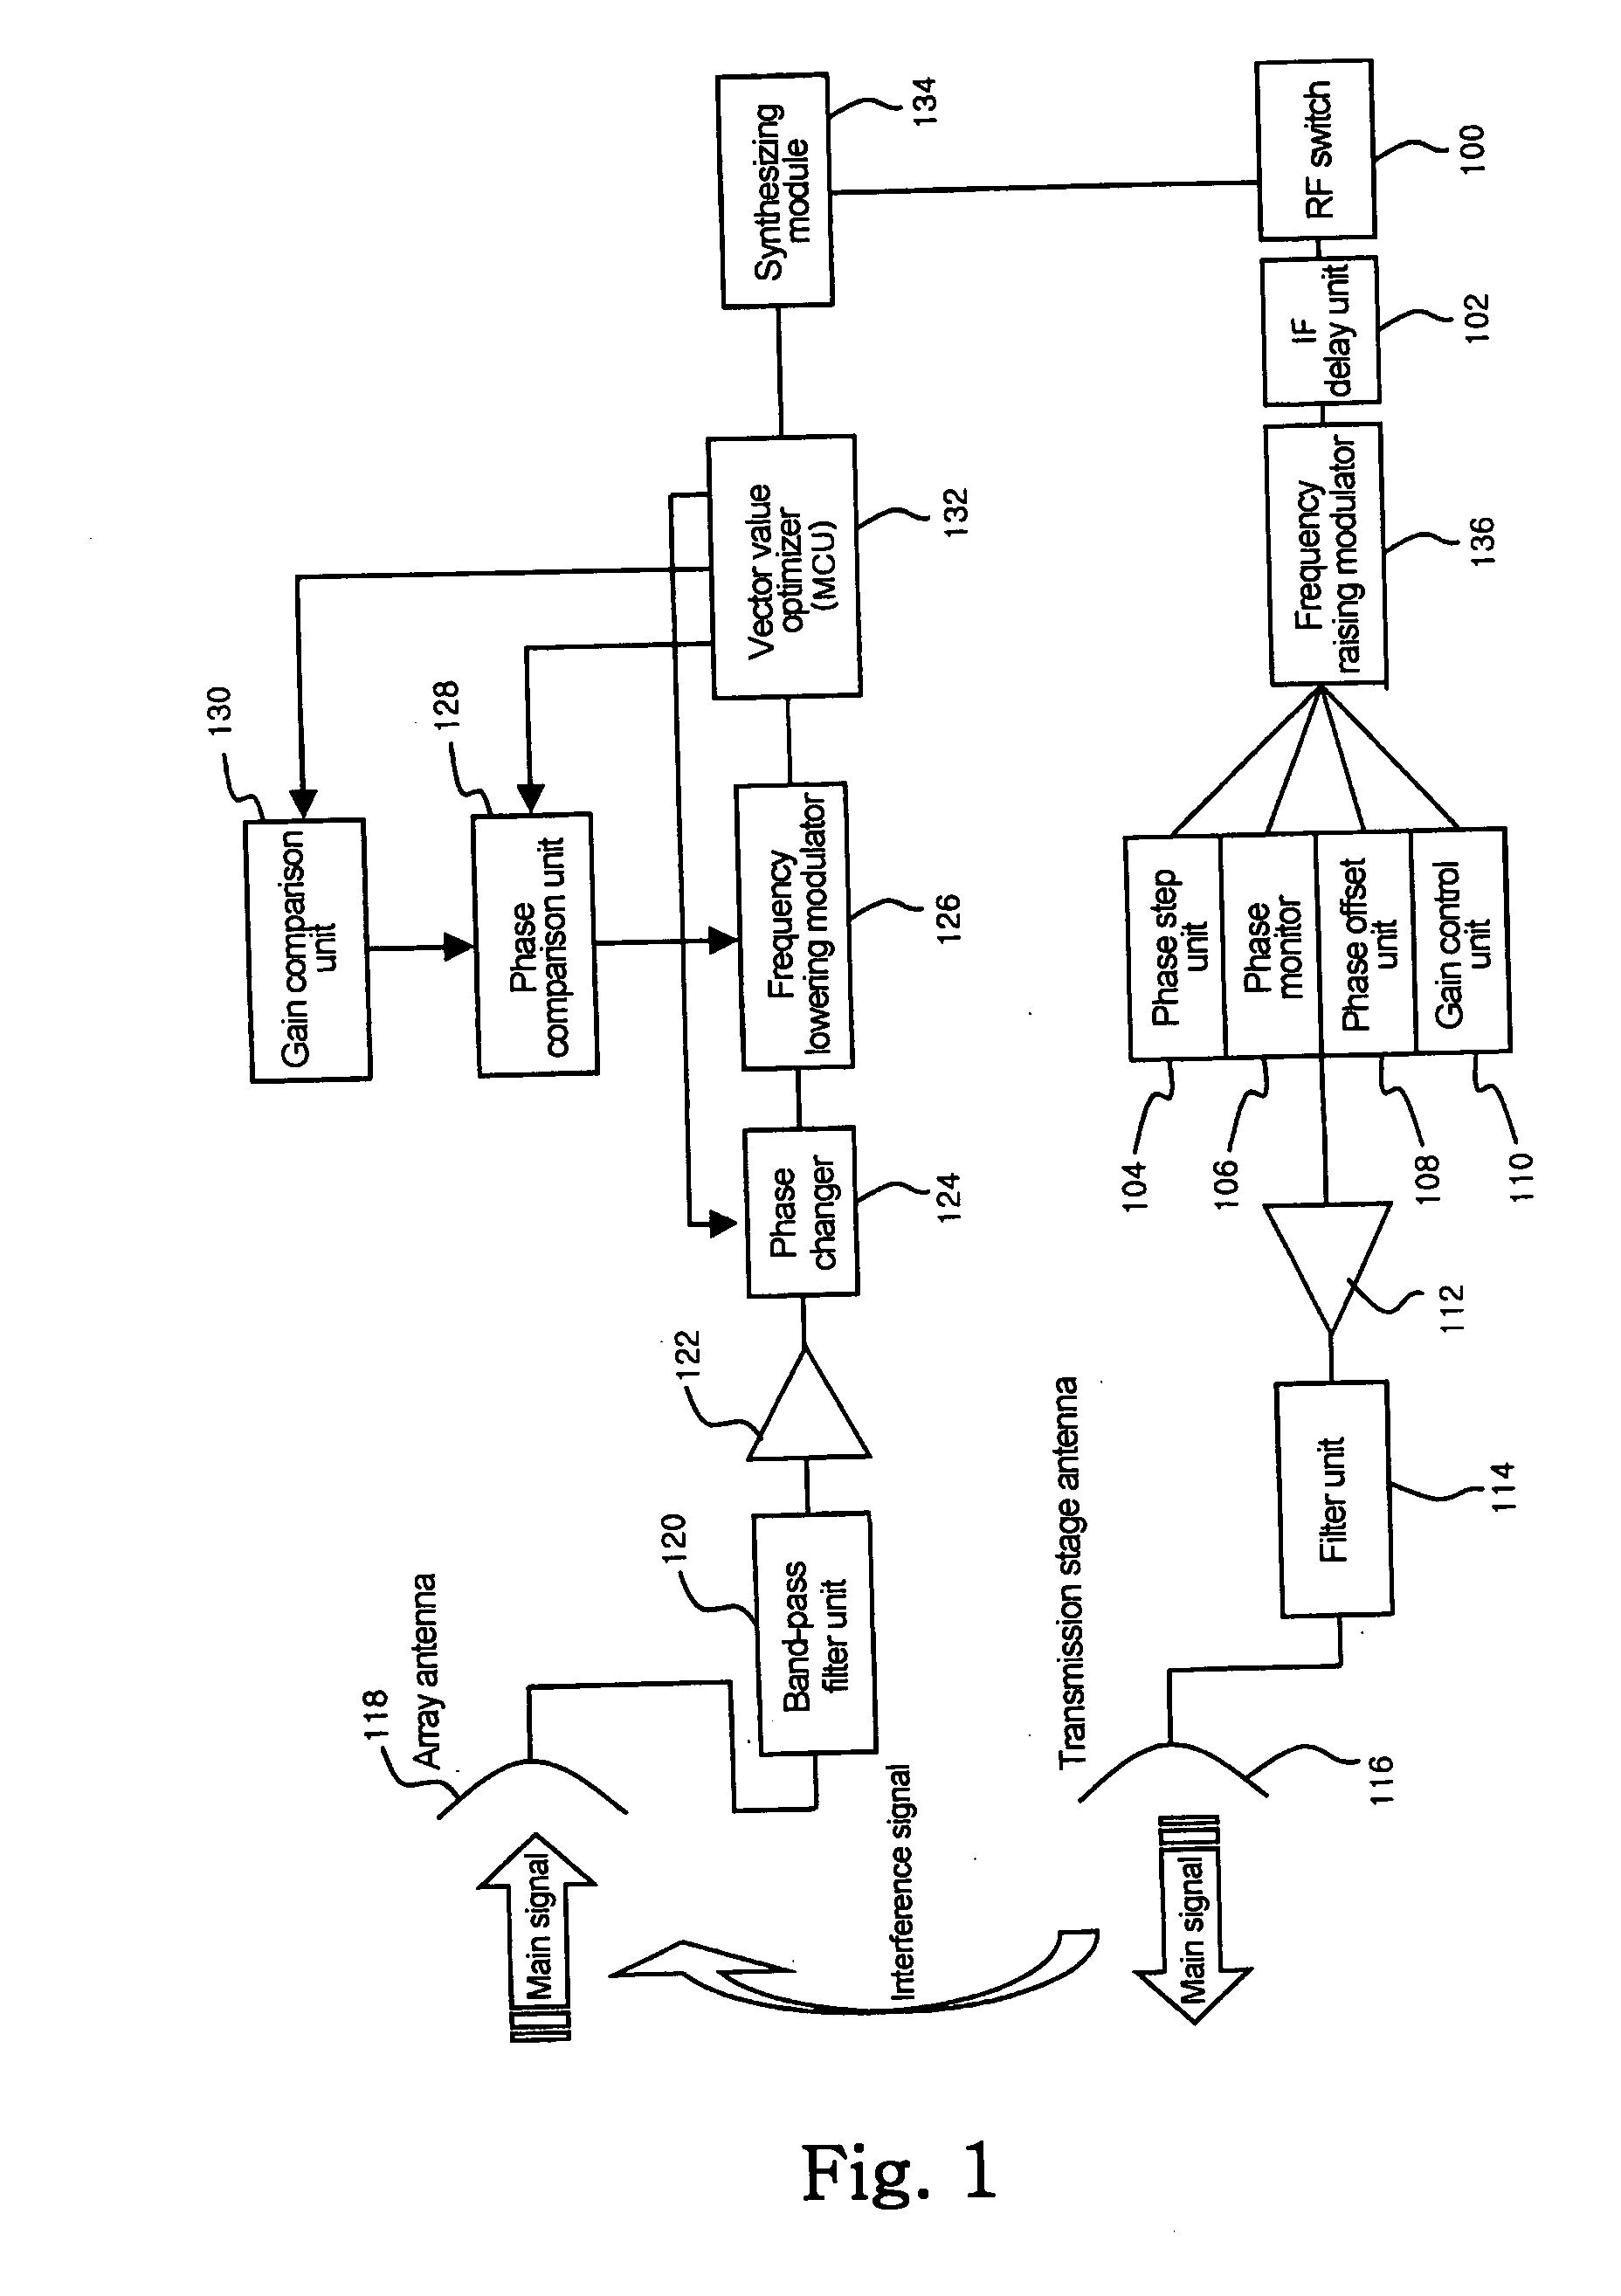 Broadband wireless repeater for mobile communication system